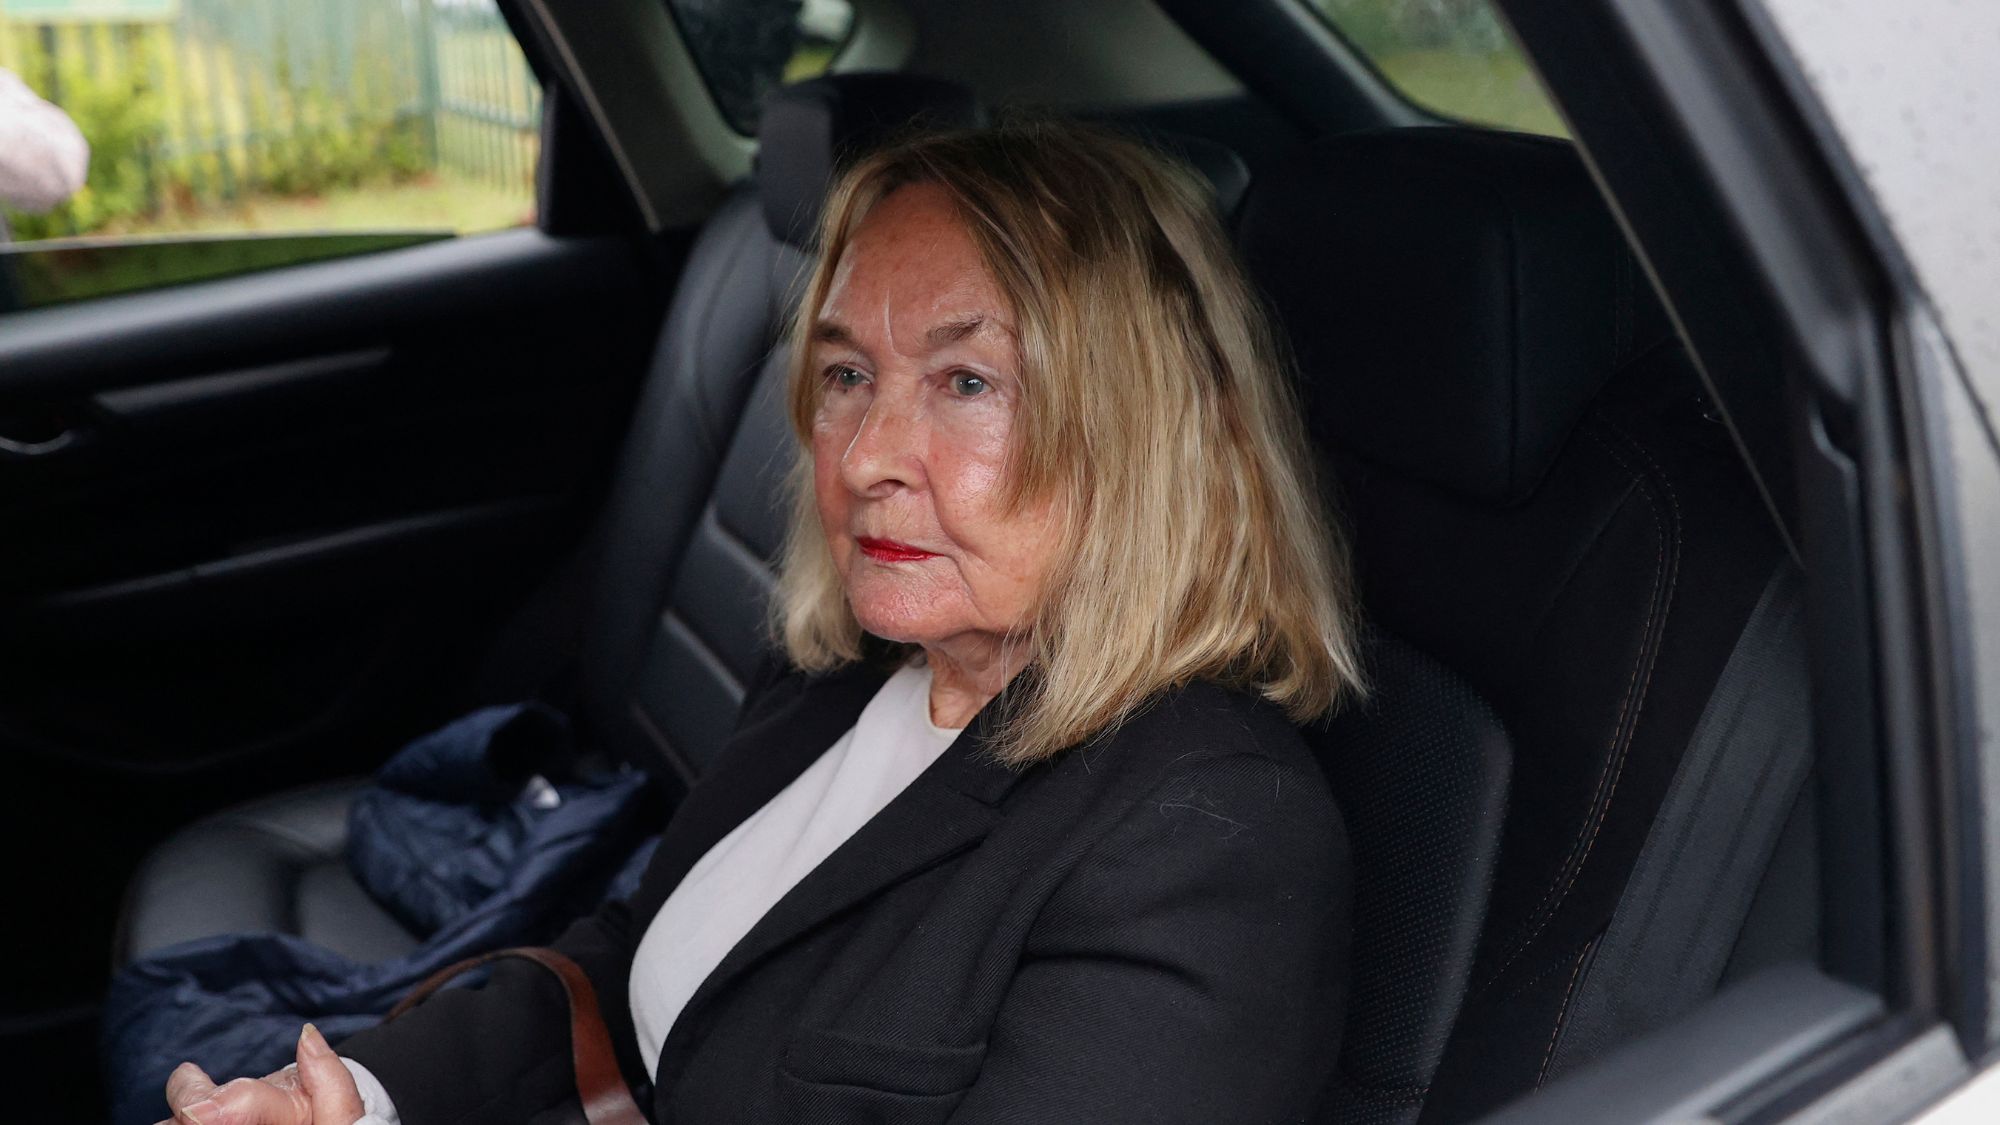 June Steenkamp sits in a car at the Atteridgeville Correctional Centre in Pretoria